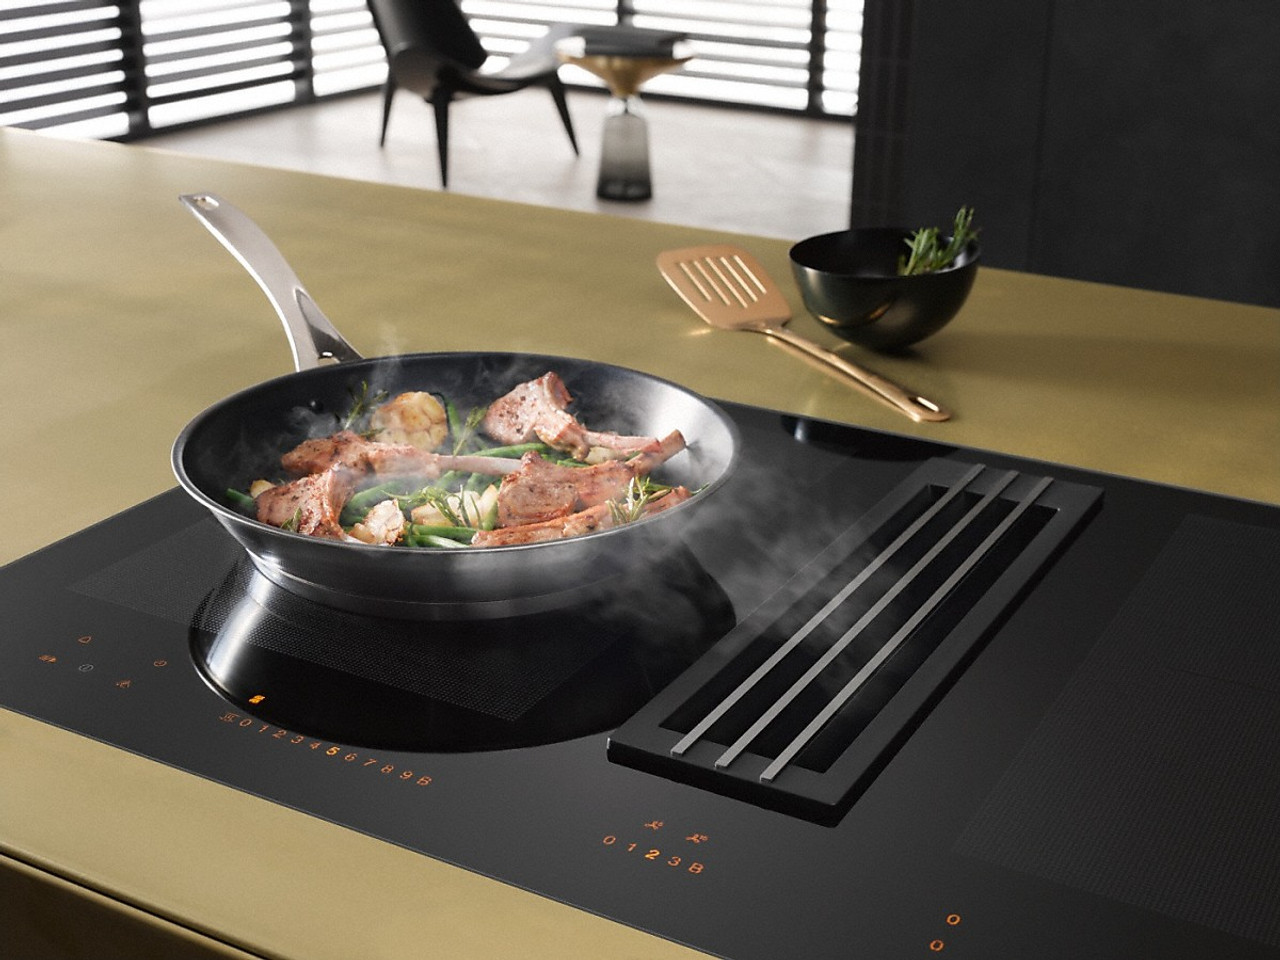 KMDA 7633 FL Induction Cooktop With Integrated Extractor - Black Ceramic